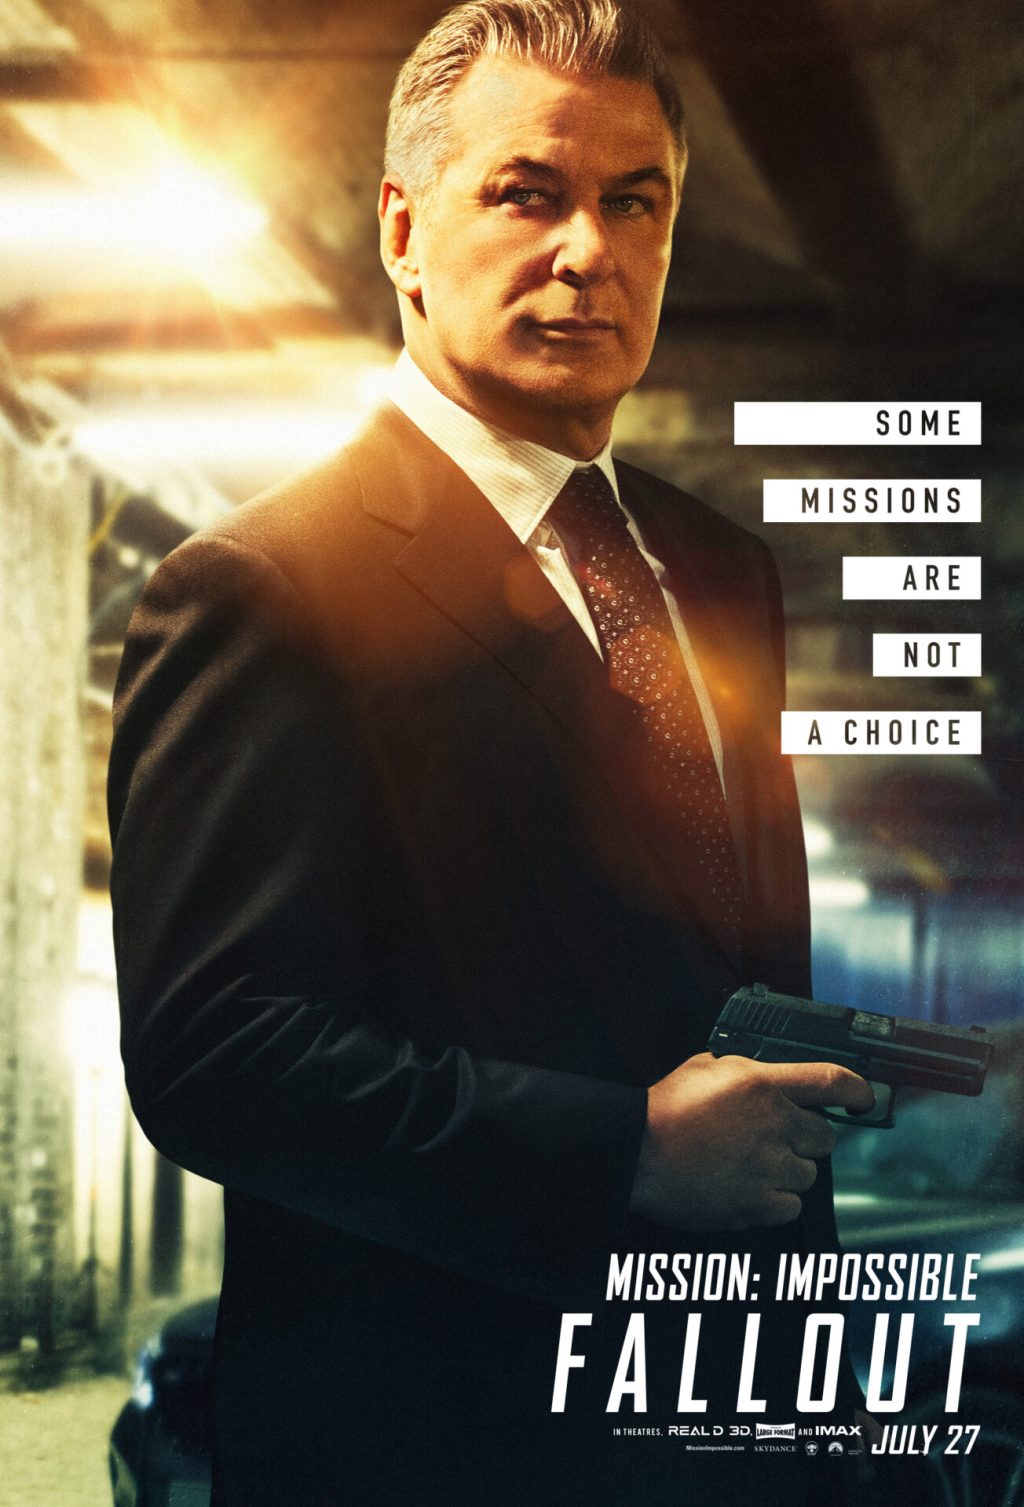 Alec Baldwin as Alan Hunley in MISSION: IMPOSSIBLE - FALLOUT, from Paramount Pictures and Skydance.